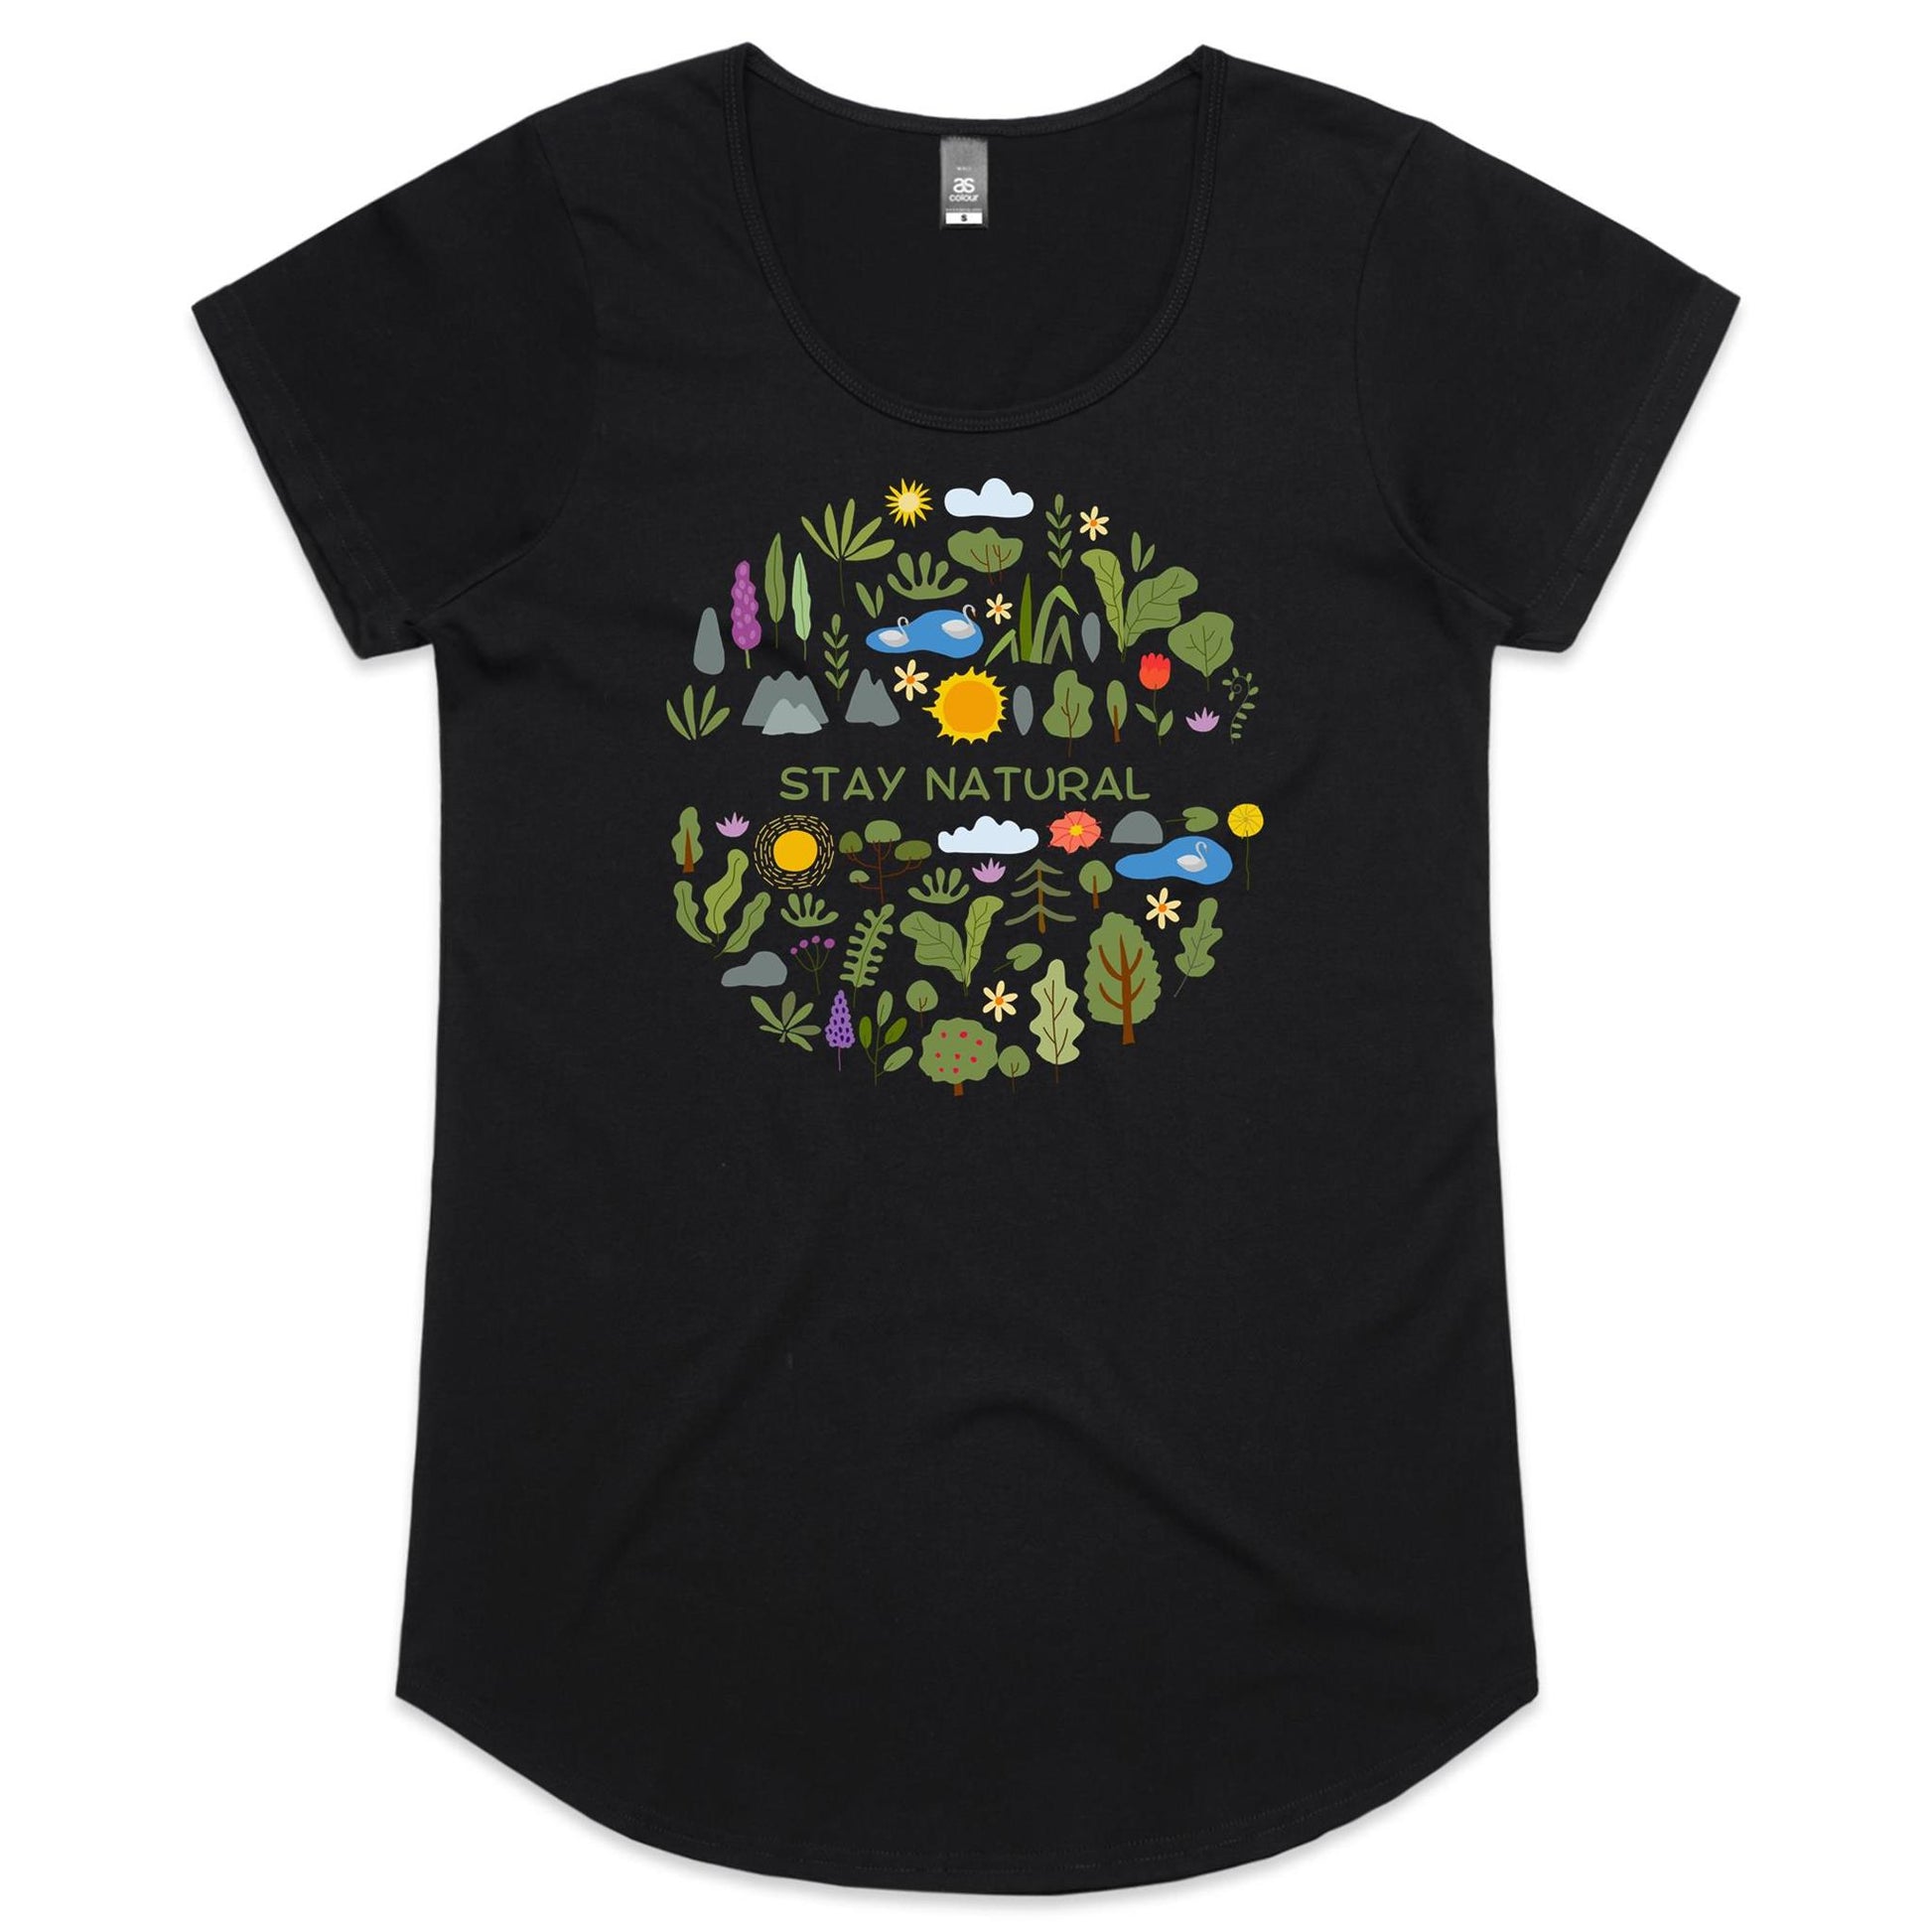 Stay Natural - Womens Scoop Neck T-Shirt Black Womens Scoop Neck T-shirt Environment Plants